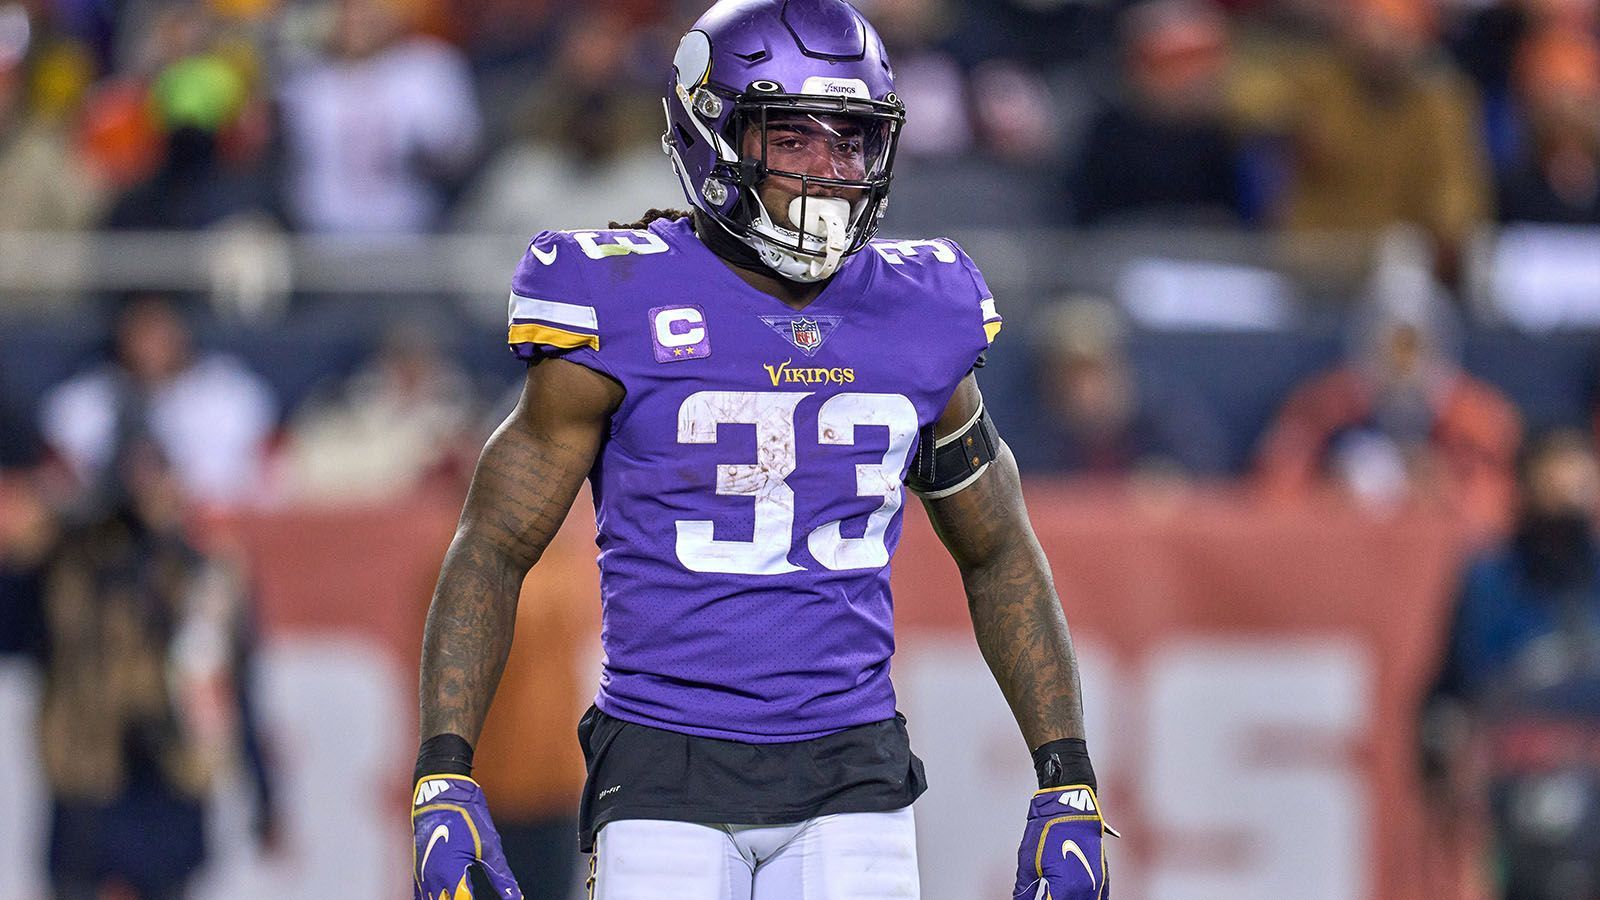 
                <strong>5. Platz: Dalvin Cook</strong><br>
                &#x2022; Team: Minnesota Vikings<br>&#x2022; Position: Running Back<br>&#x2022; <strong>Overall Rating: 94</strong><br>&#x2022; Key Stats: Speed 91 - Acceleration 92 - Agility 95<br>
              